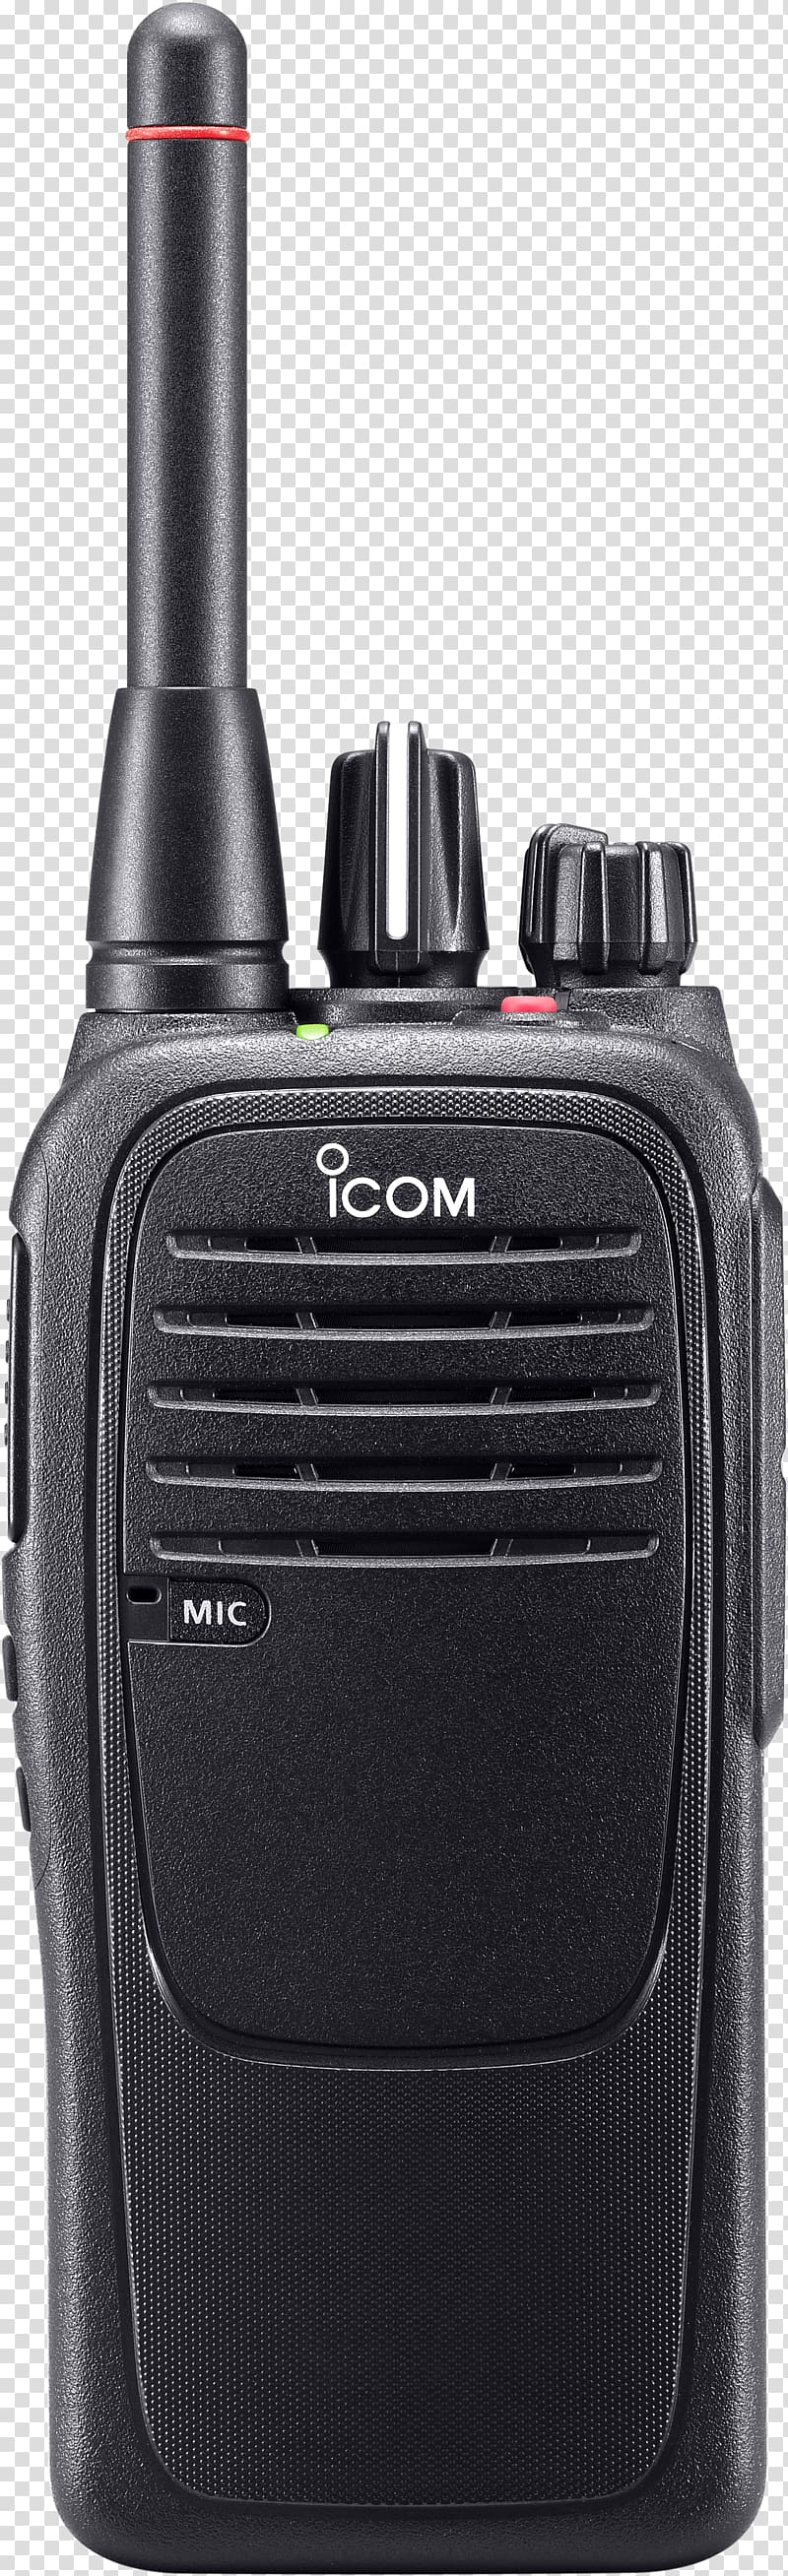 Walkie-talkie PMR446 Icom Incorporated Two-way radio Digital private mobile radio, radio transparent background PNG clipart